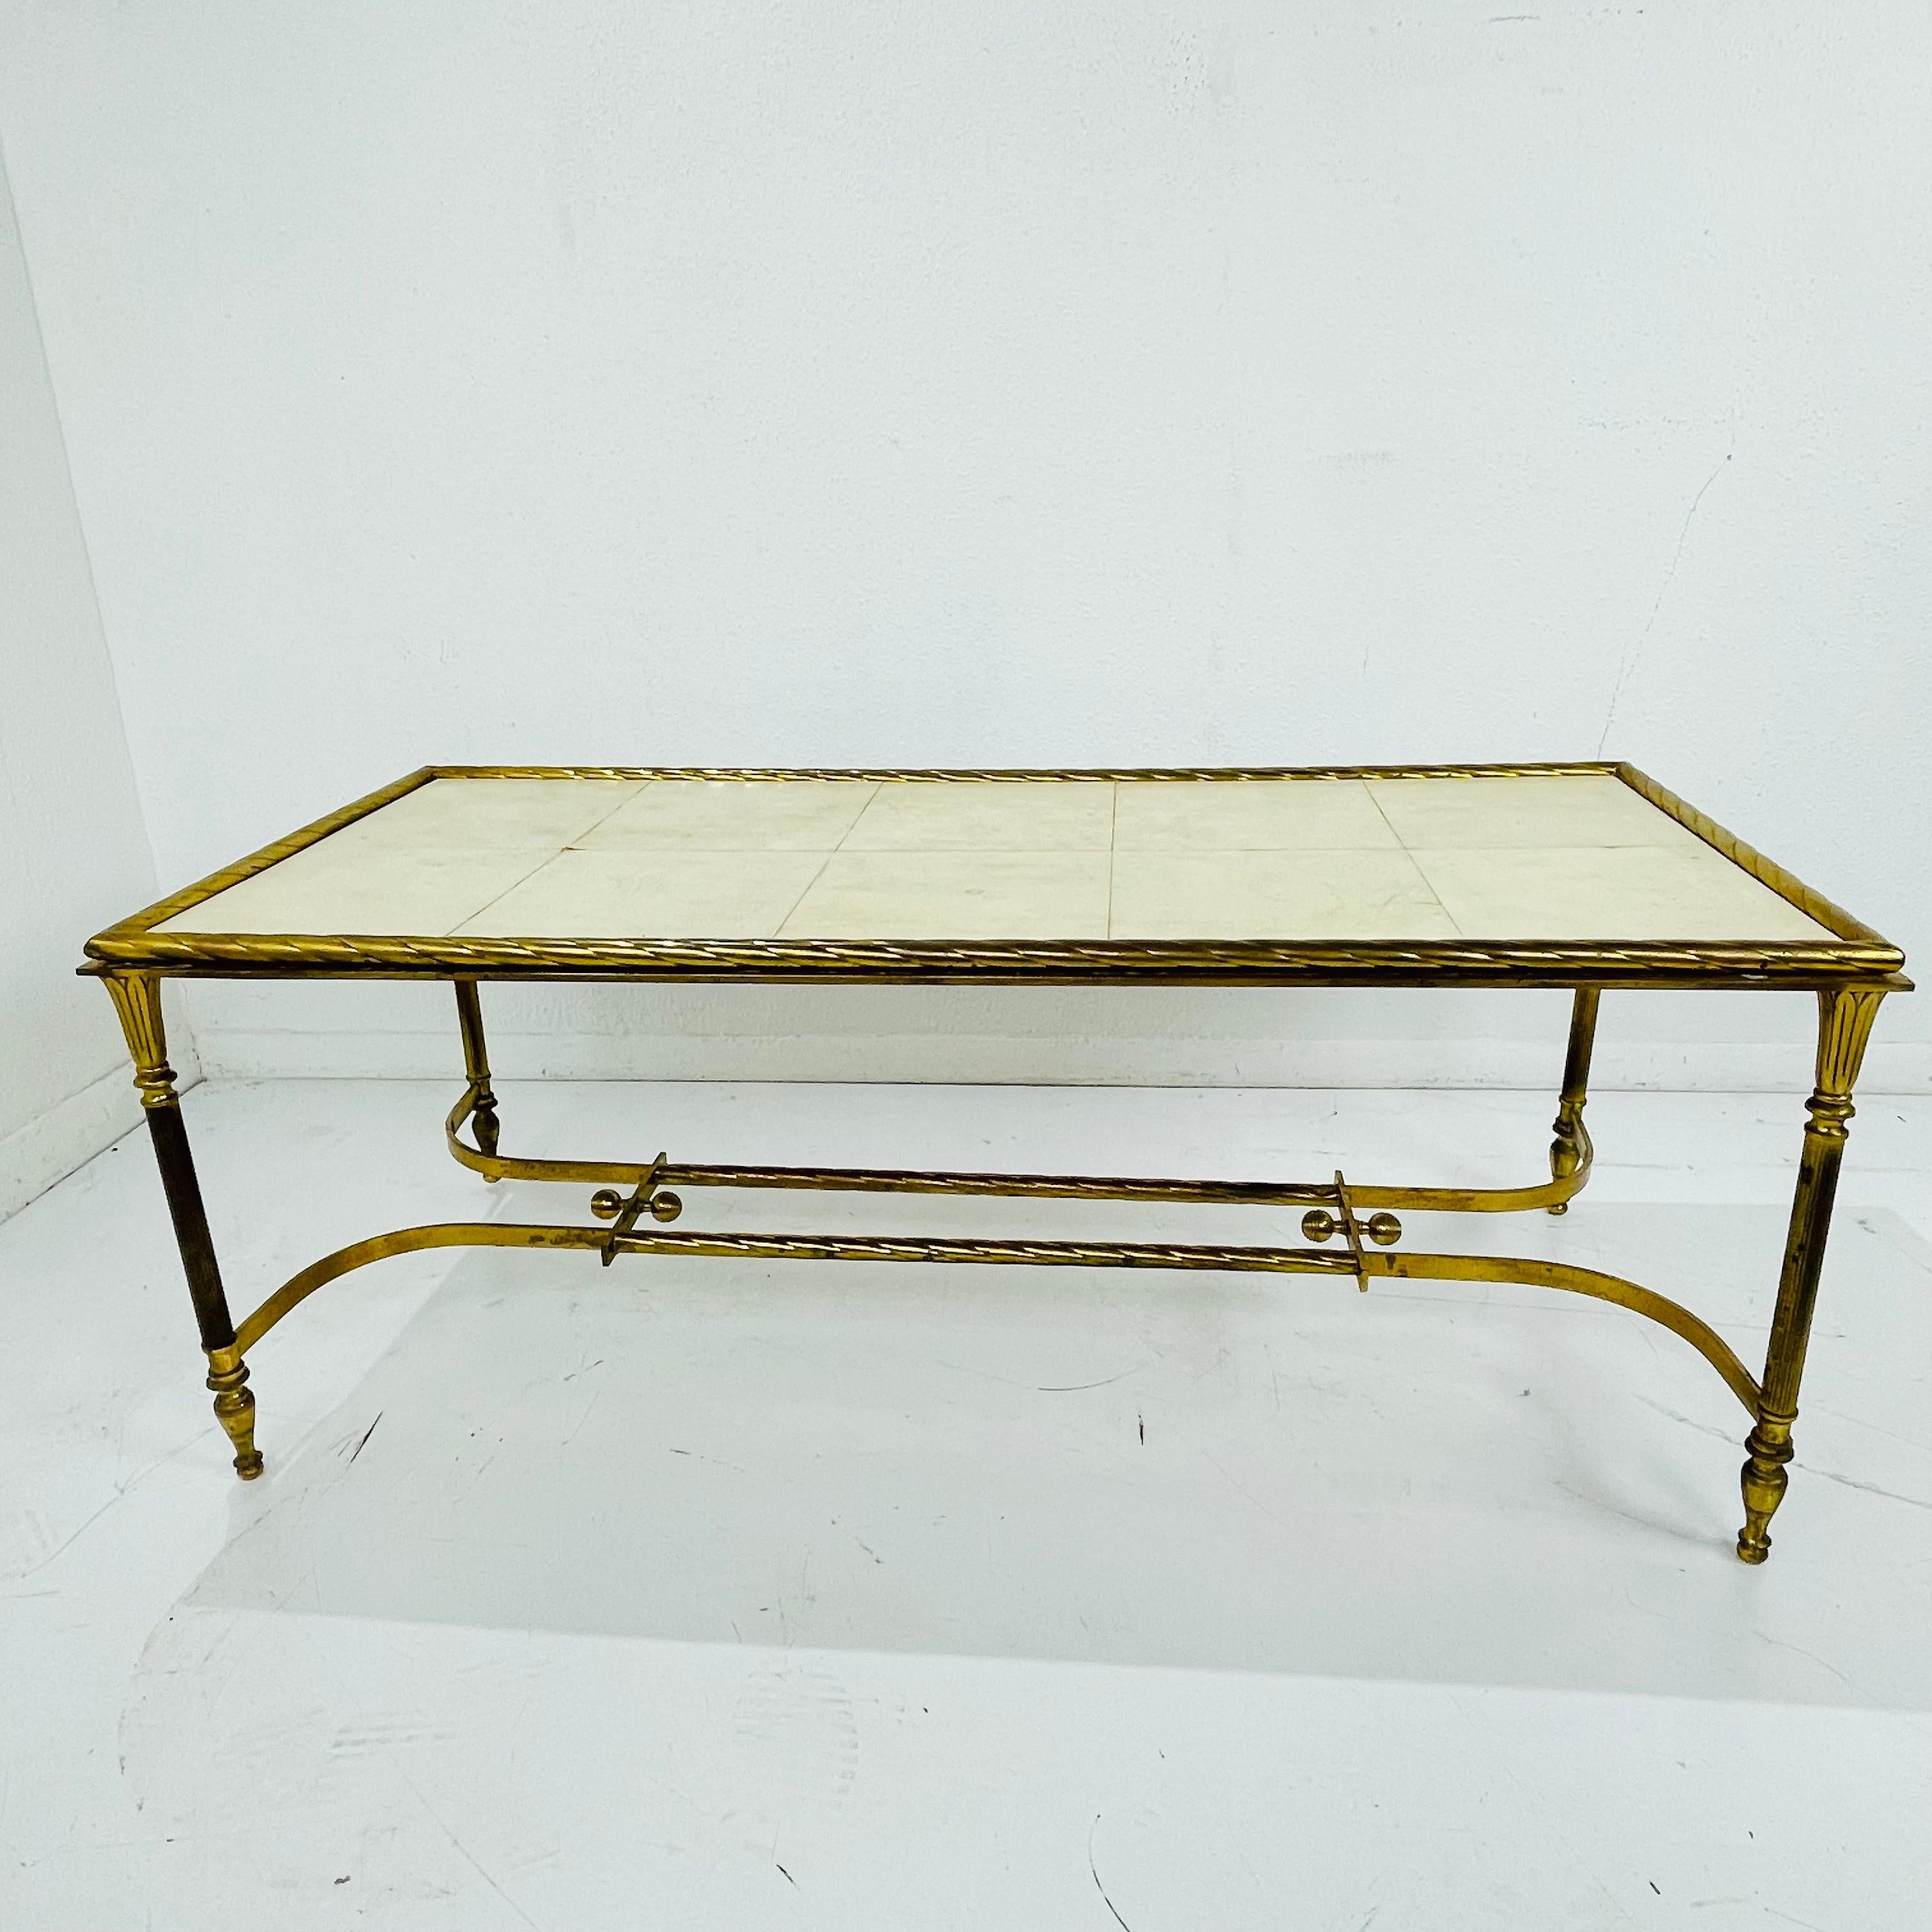 Elegant French cocktail table featuring a solid cast brass frame with a large parchment + wood tabletop. The brass is beautifully golden patinated with some oxidation spots, the parchment shows some raising at edges, scratches, and other wear due to